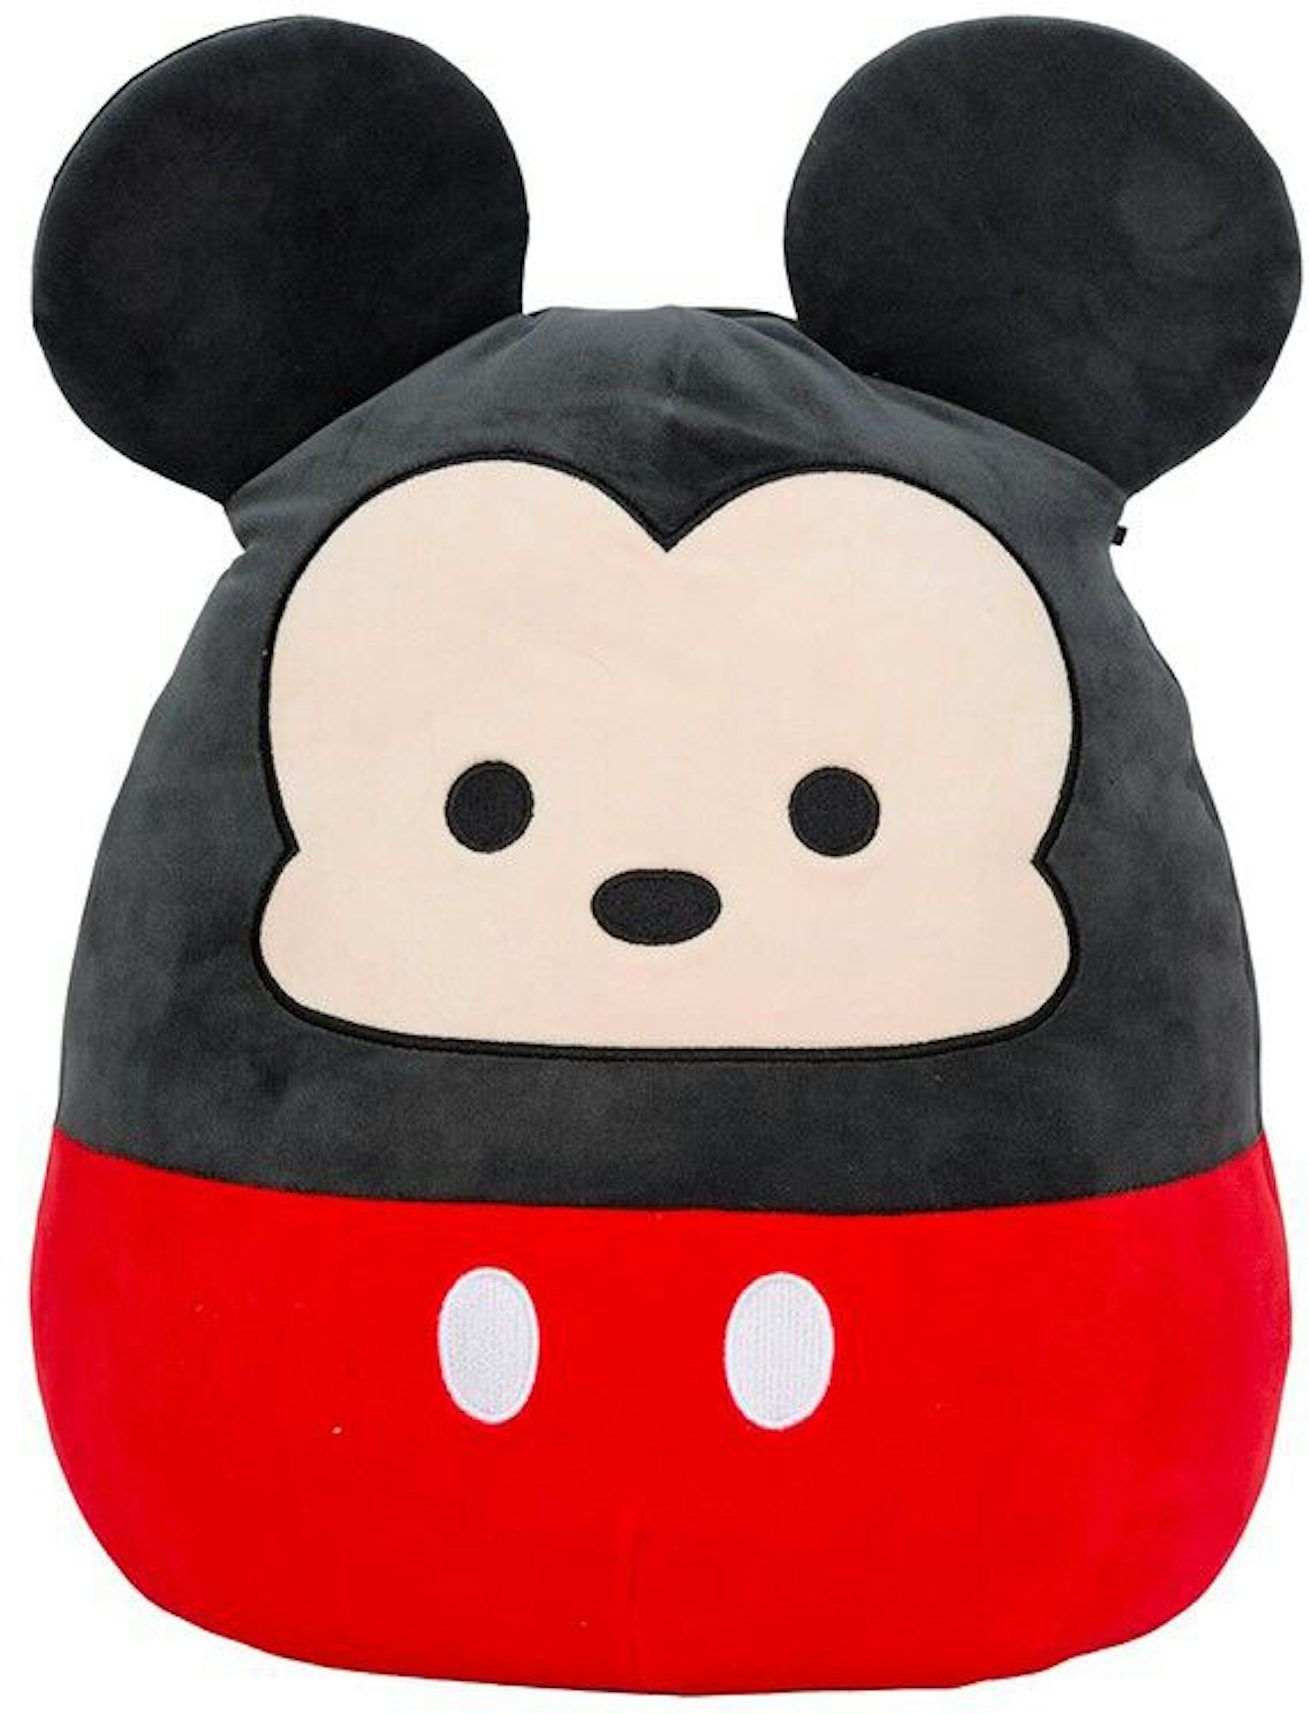 Squishmallow Mickey Mouse 14 Inch Plush Black/Red - FW20 - US